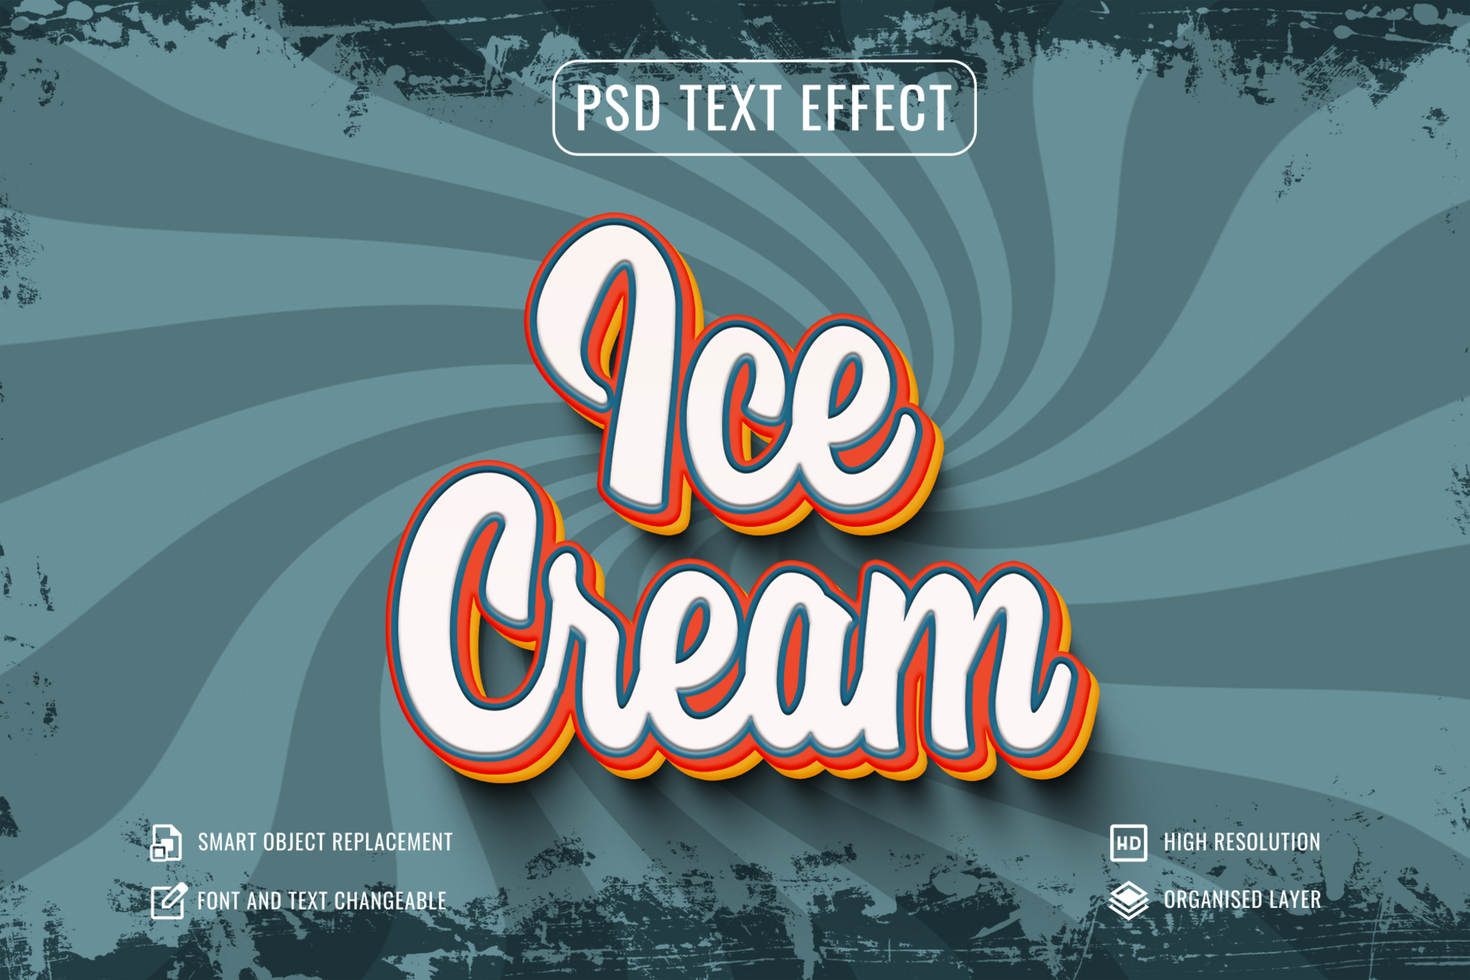 ice cream text effect with retro wave background psd